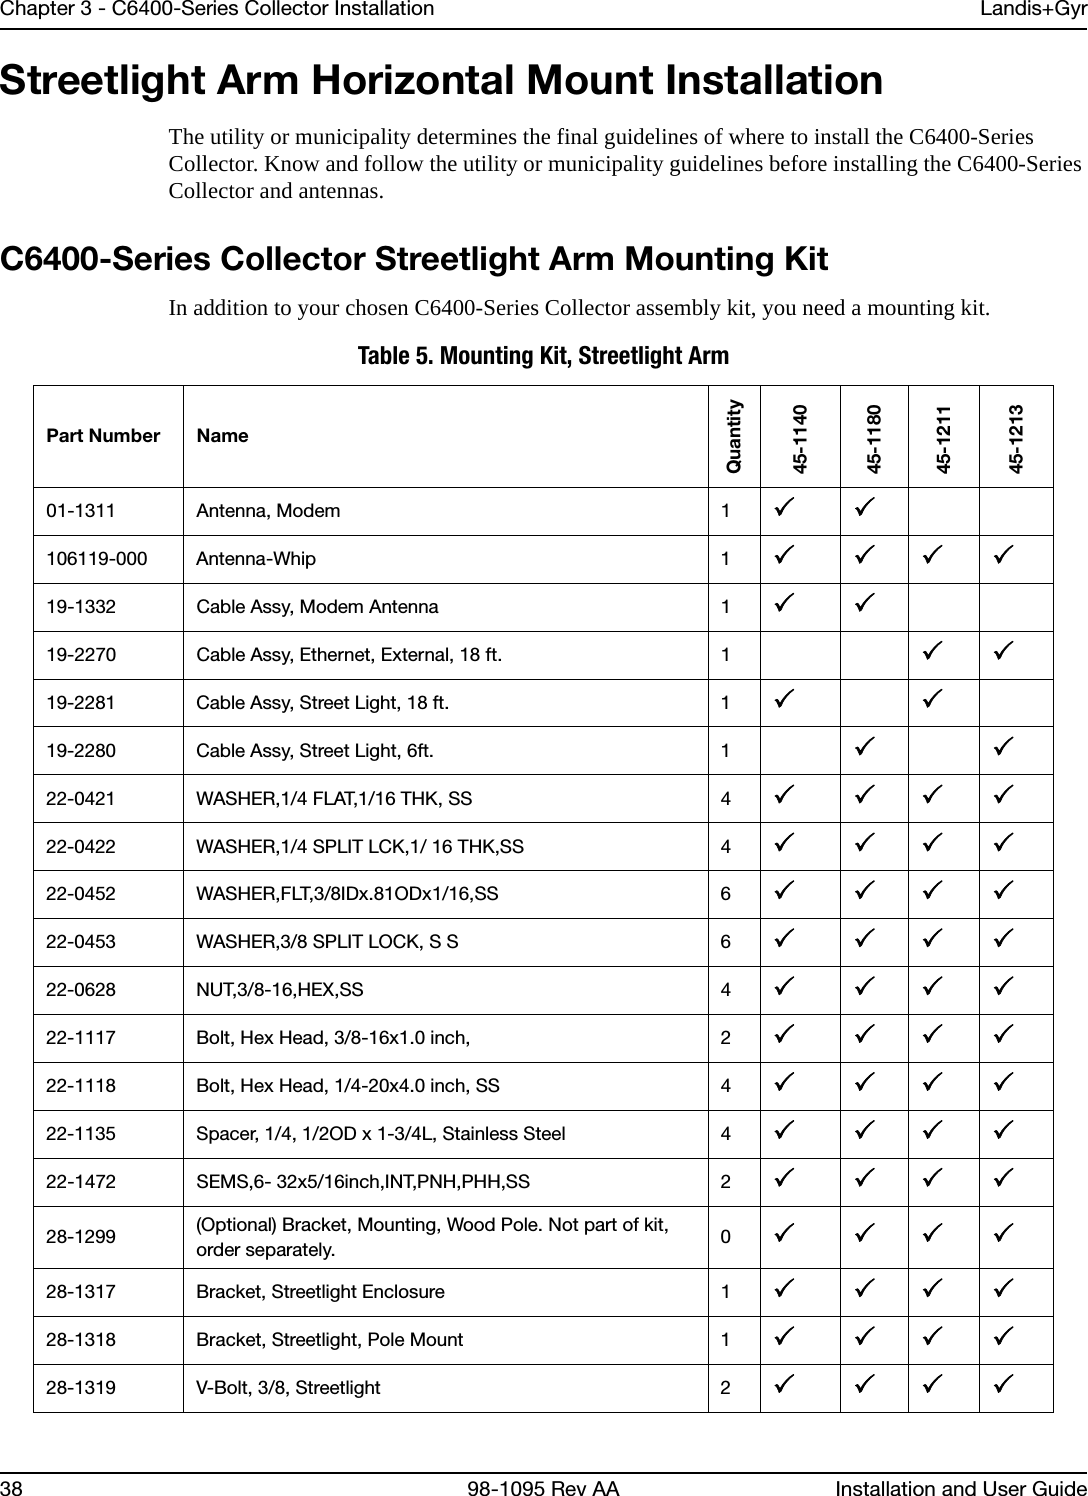 Chapter 3 - C6400-Series Collector Installation Landis+Gyr38 98-1095 Rev AA Installation and User GuideStreetlight Arm Horizontal Mount InstallationThe utility or municipality determines the final guidelines of where to install the C6400-Series Collector. Know and follow the utility or municipality guidelines before installing the C6400-Series Collector and antennas.C6400-Series Collector Streetlight Arm Mounting KitIn addition to your chosen C6400-Series Collector assembly kit, you need a mounting kit.Table 5. Mounting Kit, Streetlight ArmPart Number NameQuantity45-114045-118045-121145-121301-1311 Antenna, Modem 1 106119-000 Antenna-Whip 1 19-1332 Cable Assy, Modem Antenna 1 19-2270 Cable Assy, Ethernet, External, 18 ft. 1 19-2281 Cable Assy, Street Light, 18 ft. 1 19-2280 Cable Assy, Street Light, 6ft. 1 22-0421 WASHER,1/4 FLAT,1/16 THK, SS 4 22-0422 WASHER,1/4 SPLIT LCK,1/ 16 THK,SS 4 22-0452 WASHER,FLT,3/8IDx.81ODx1/16,SS 6 22-0453 WASHER,3/8 SPLIT LOCK, S S 6 22-0628 NUT,3/8-16,HEX,SS 4 22-1117 Bolt, Hex Head, 3/8-16x1.0 inch, 2 22-1118 Bolt, Hex Head, 1/4-20x4.0 inch, SS 4 22-1135 Spacer, 1/4, 1/2OD x 1-3/4L, Stainless Steel 4 22-1472 SEMS,6- 32x5/16inch,INT,PNH,PHH,SS 2 28-1299 (Optional) Bracket, Mounting, Wood Pole. Not part of kit, order separately. 028-1317 Bracket, Streetlight Enclosure 1 28-1318 Bracket, Streetlight, Pole Mount 1 28-1319 V-Bolt, 3/8, Streetlight 2 